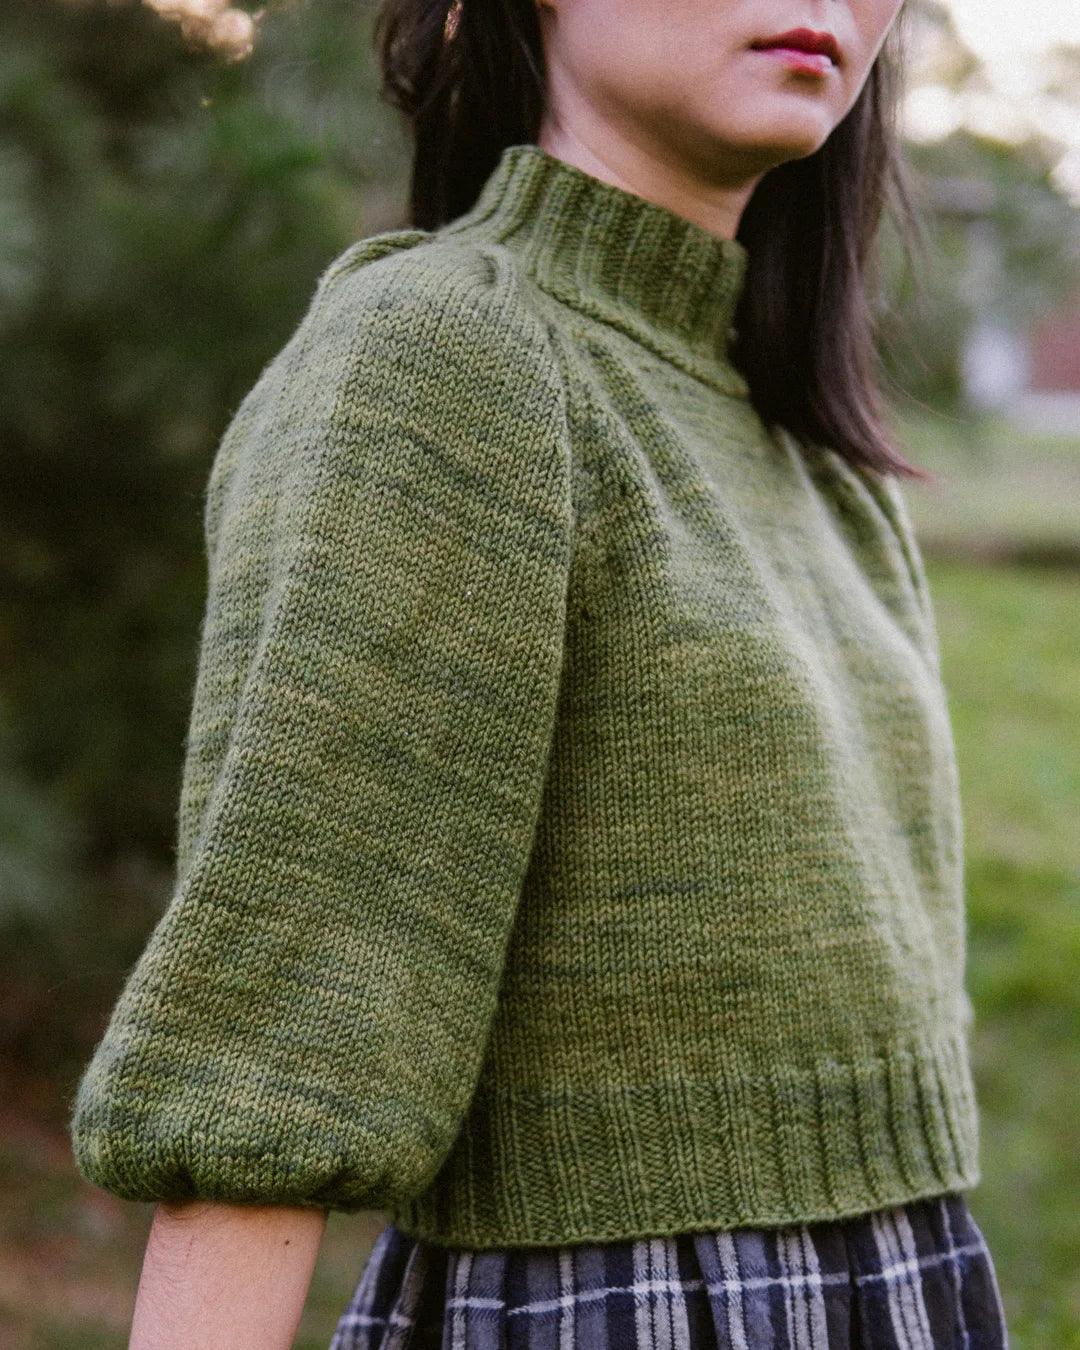 Anne's Puffed Sleeves - Knitting Pattern (PDF) - Aimee Sher Makes